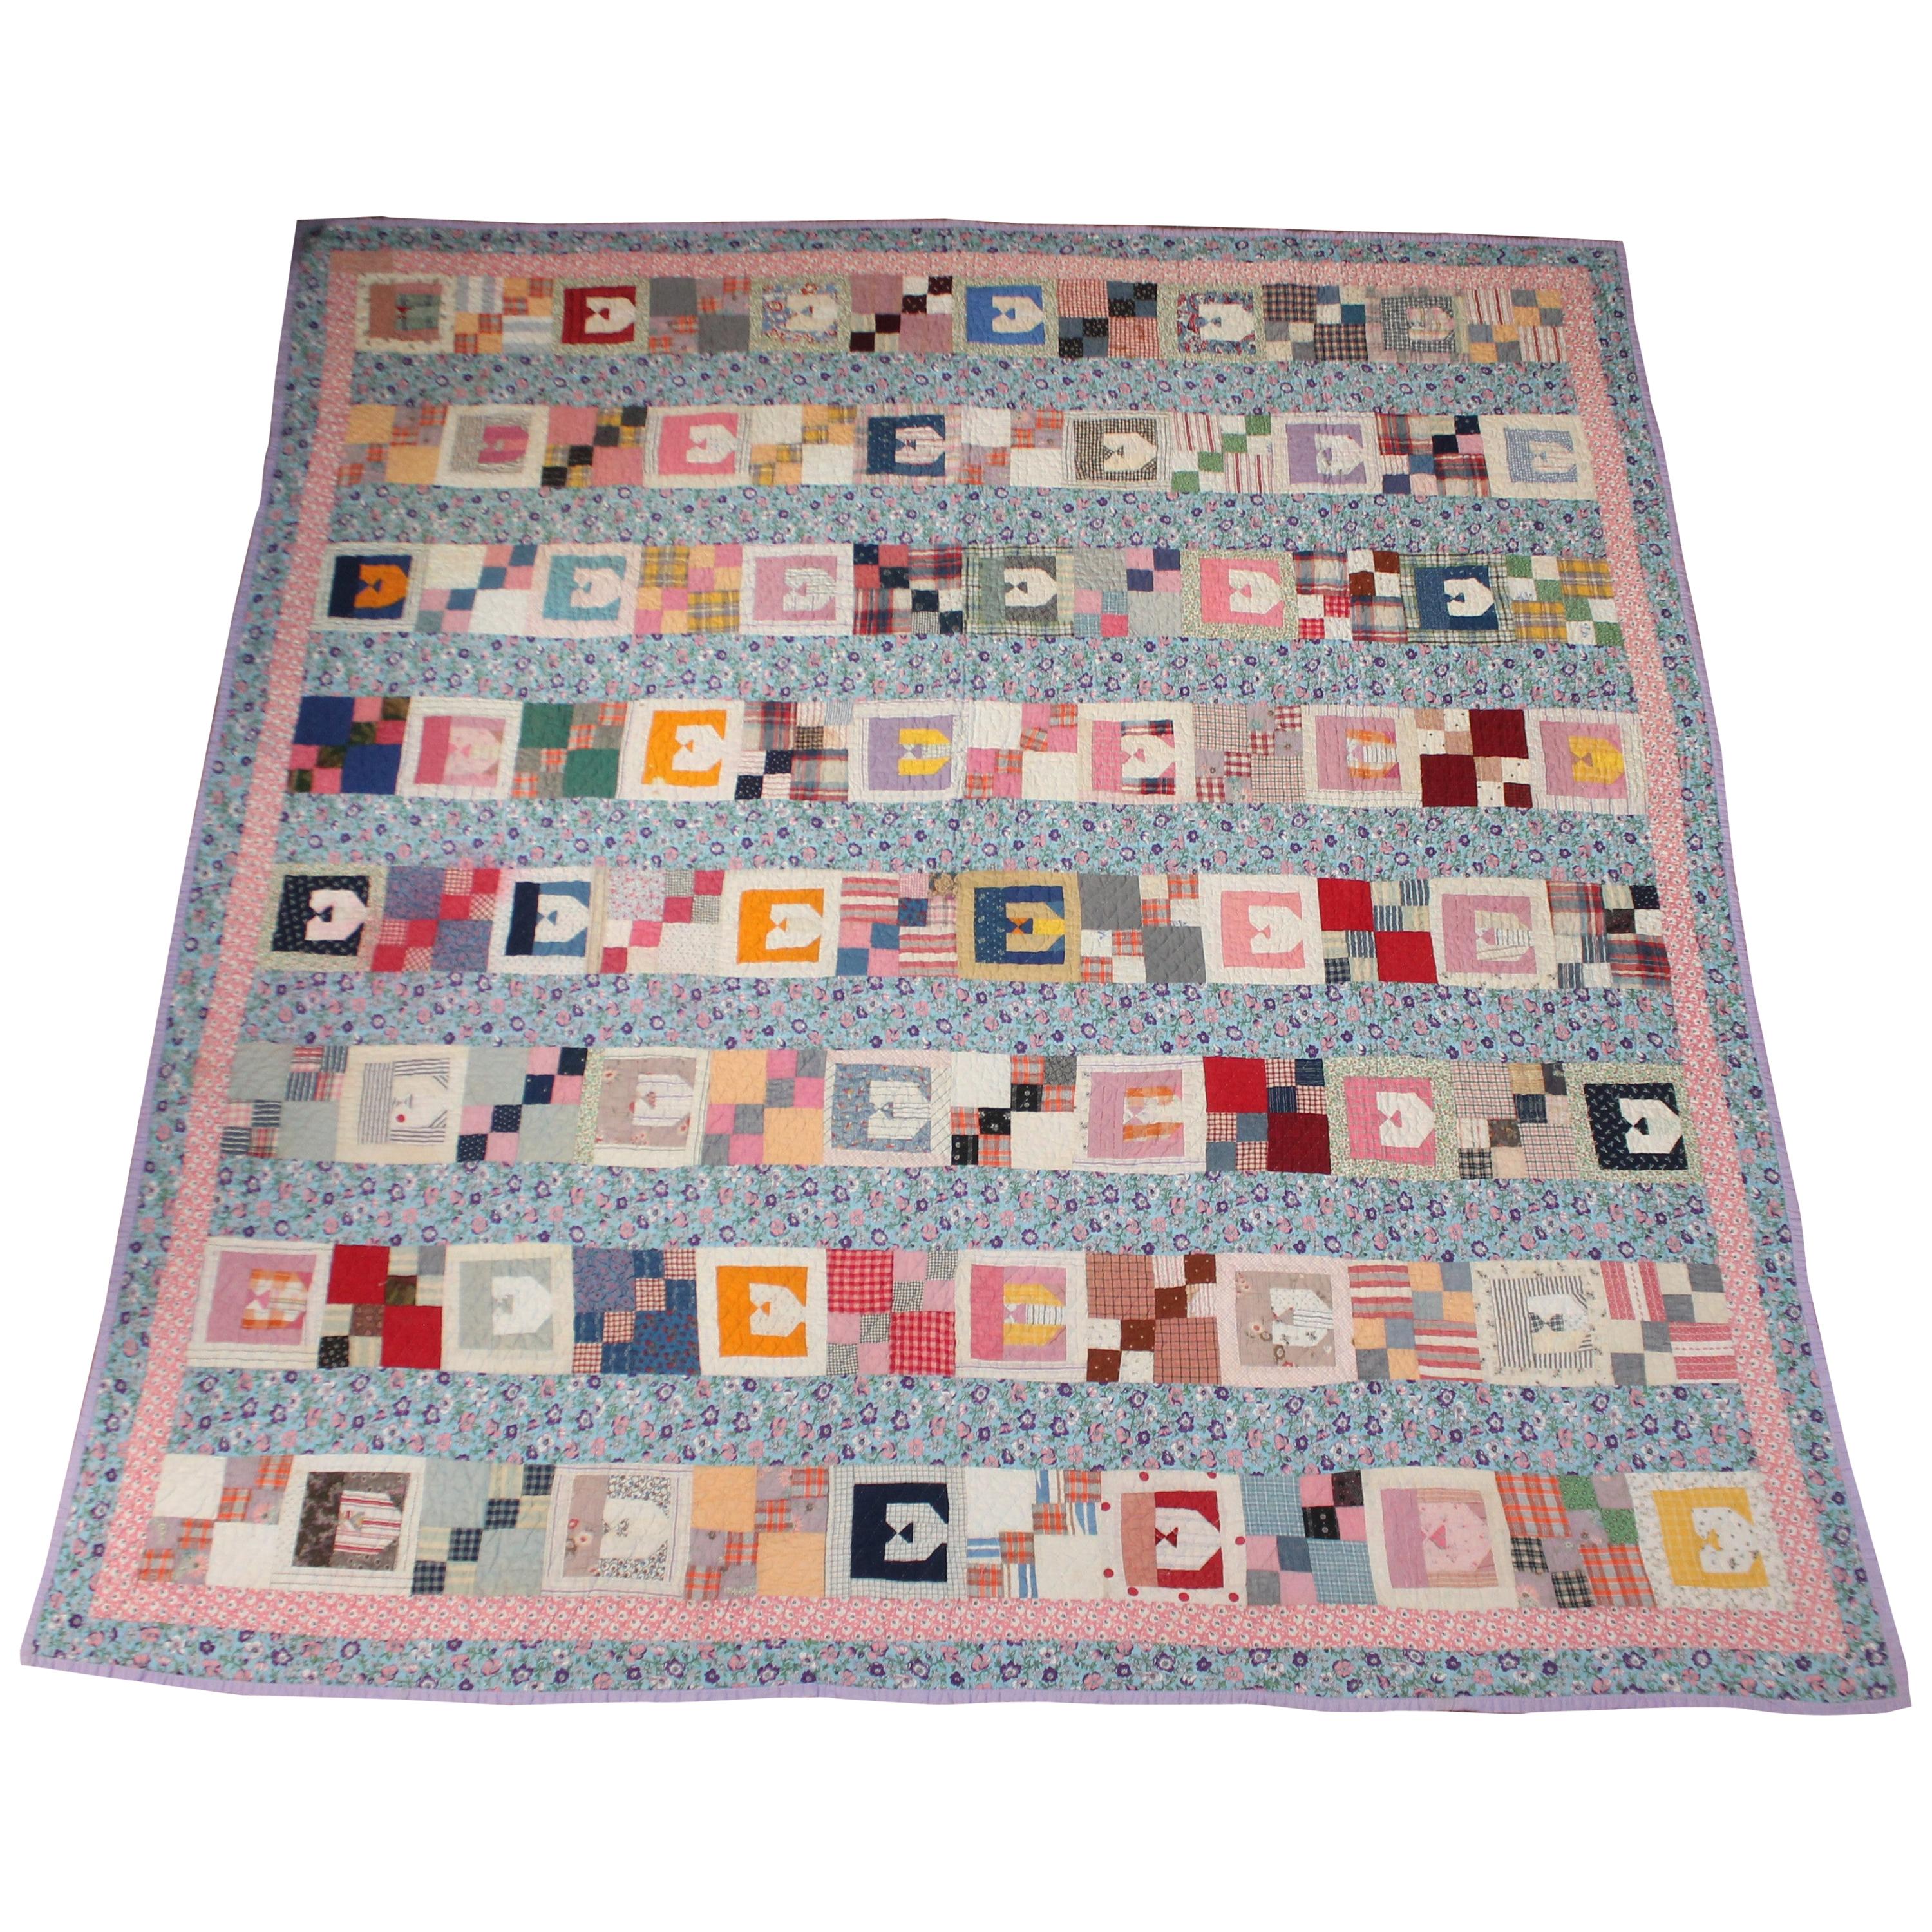 Antique Quilt with the Letter "E"